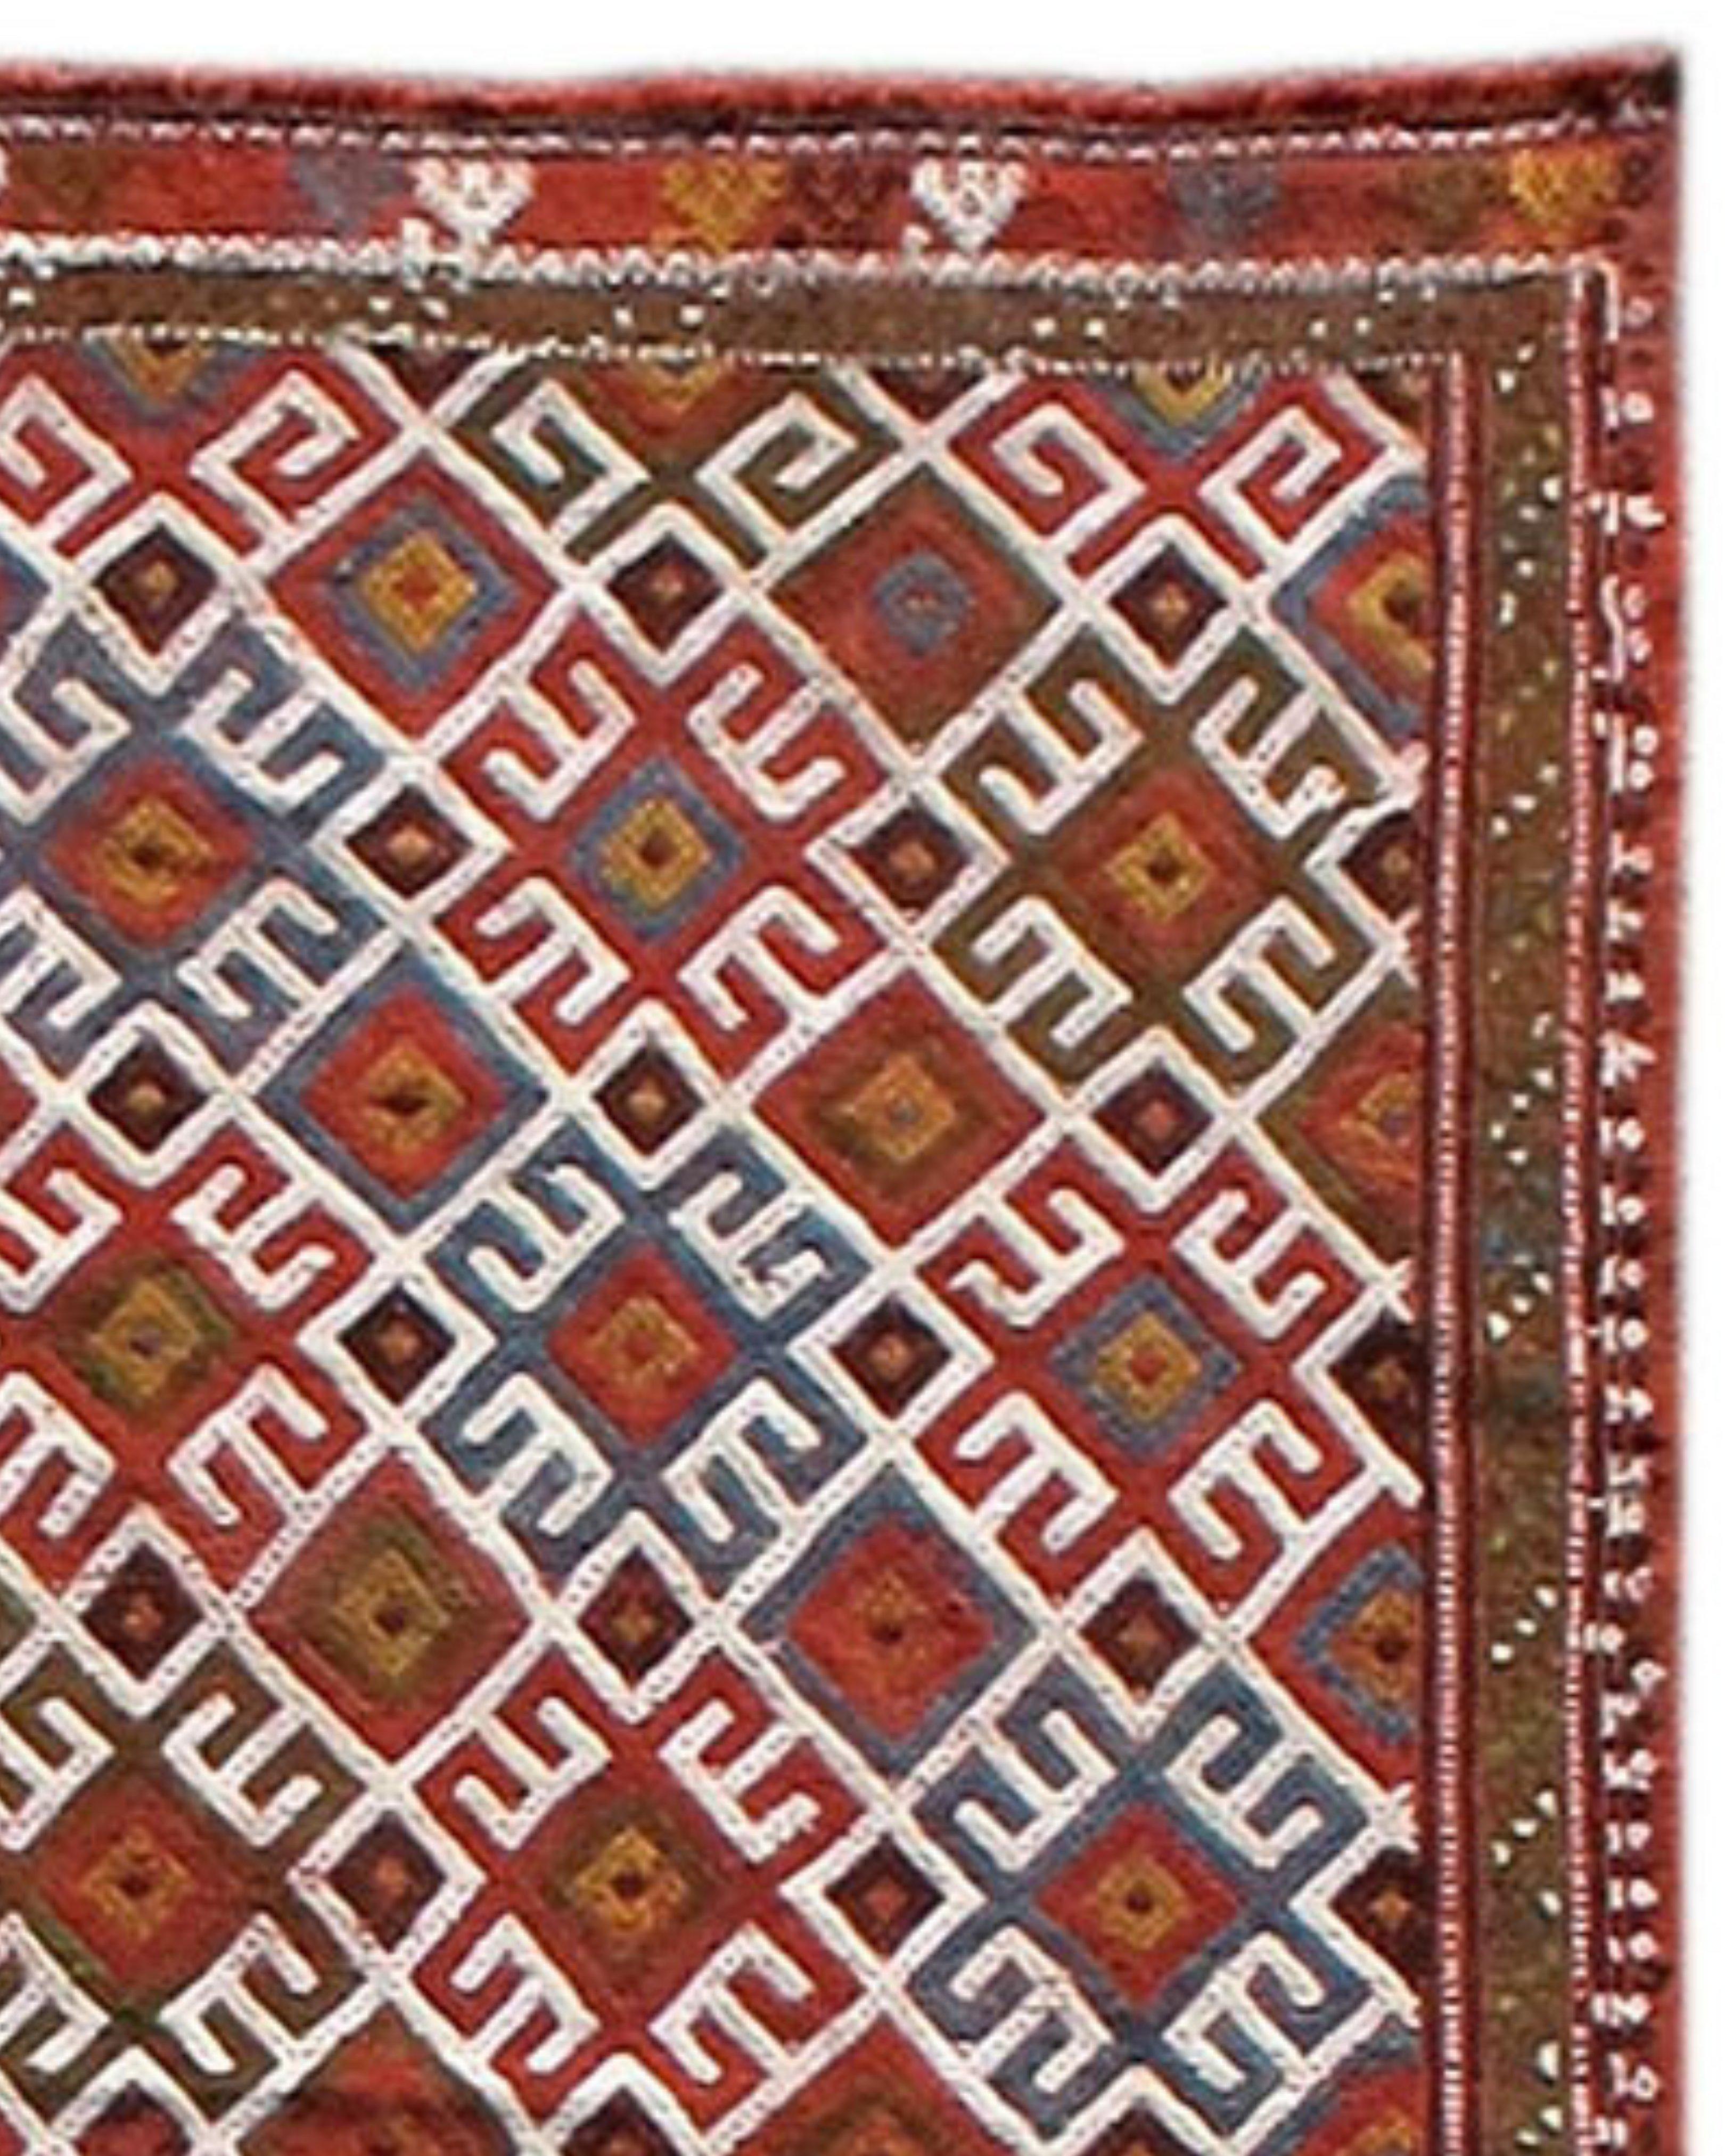 Antique Anatolian Verneh Flatweave Rug, 19th Century

With its alternation of boxes and latch-hook diamonds highlighted by alternating diagonal rows of color on an ivory ground, this flat-woven Anatolian Verneh achieves an “eye-dazzling” effect. Of